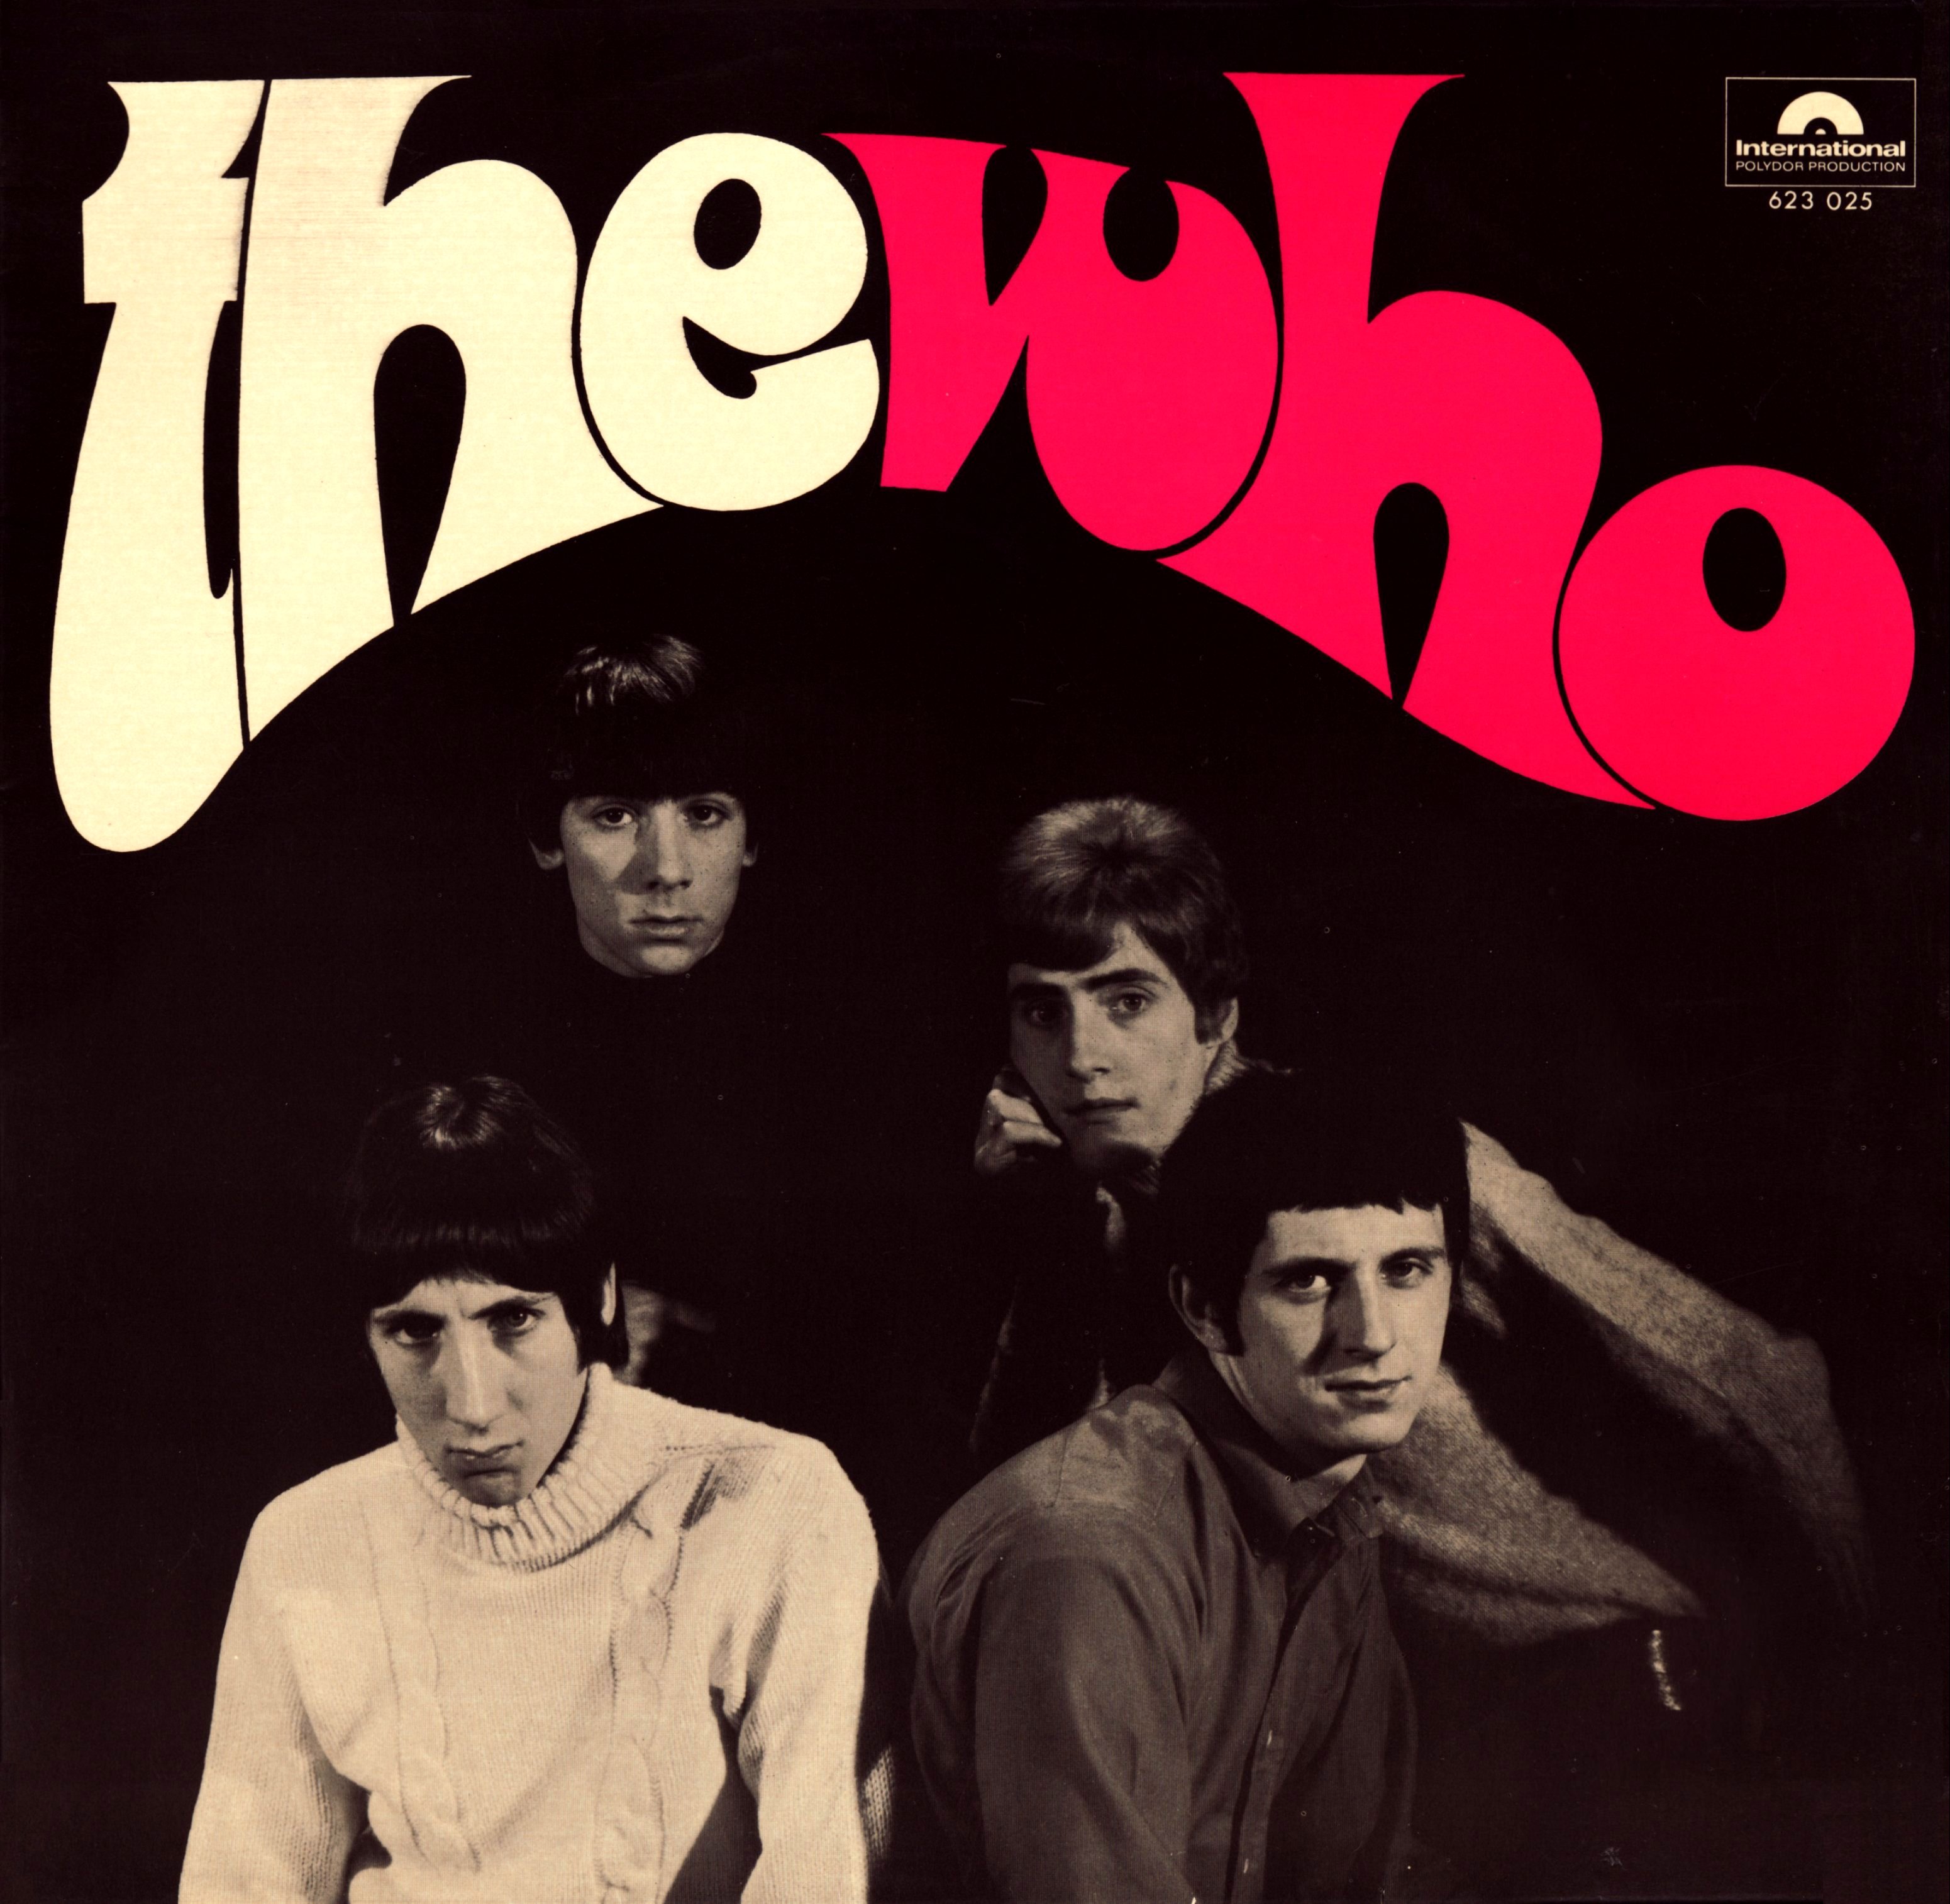 Albums the who. The who Band. The who обложки. Группа the who альбомы. The who обложки альбомов.